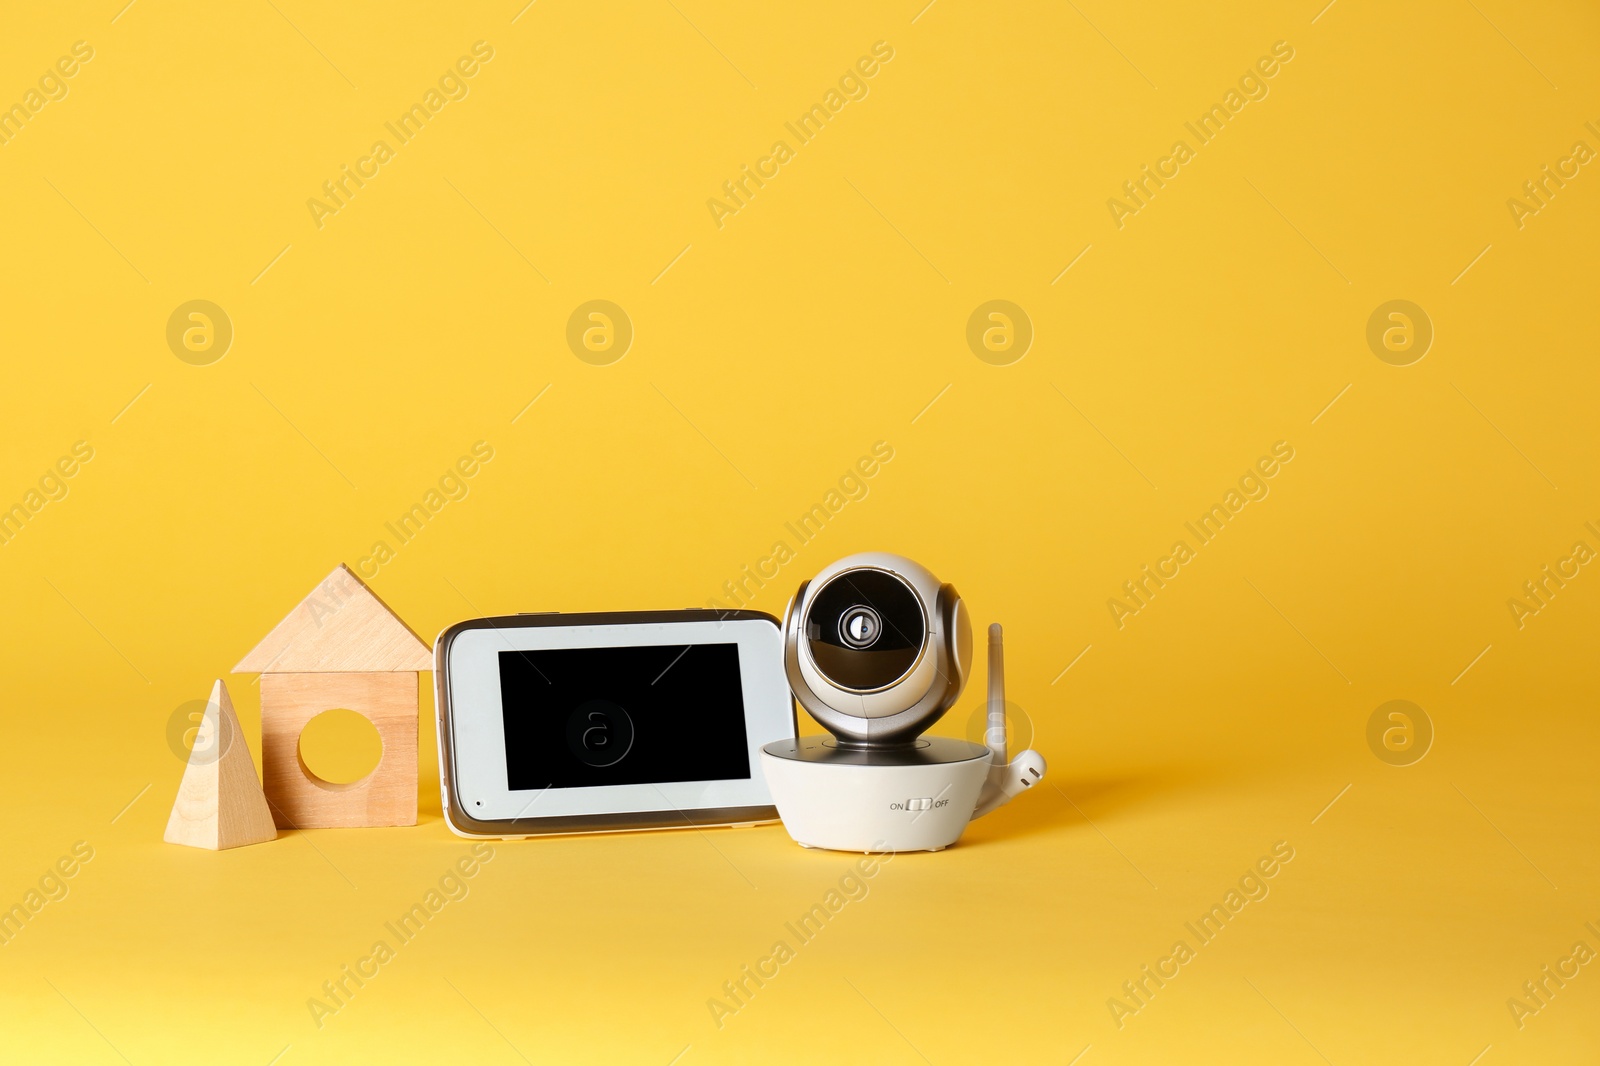 Photo of Modern CCTV security camera, wooden blocks and monitor on color background. Space for text